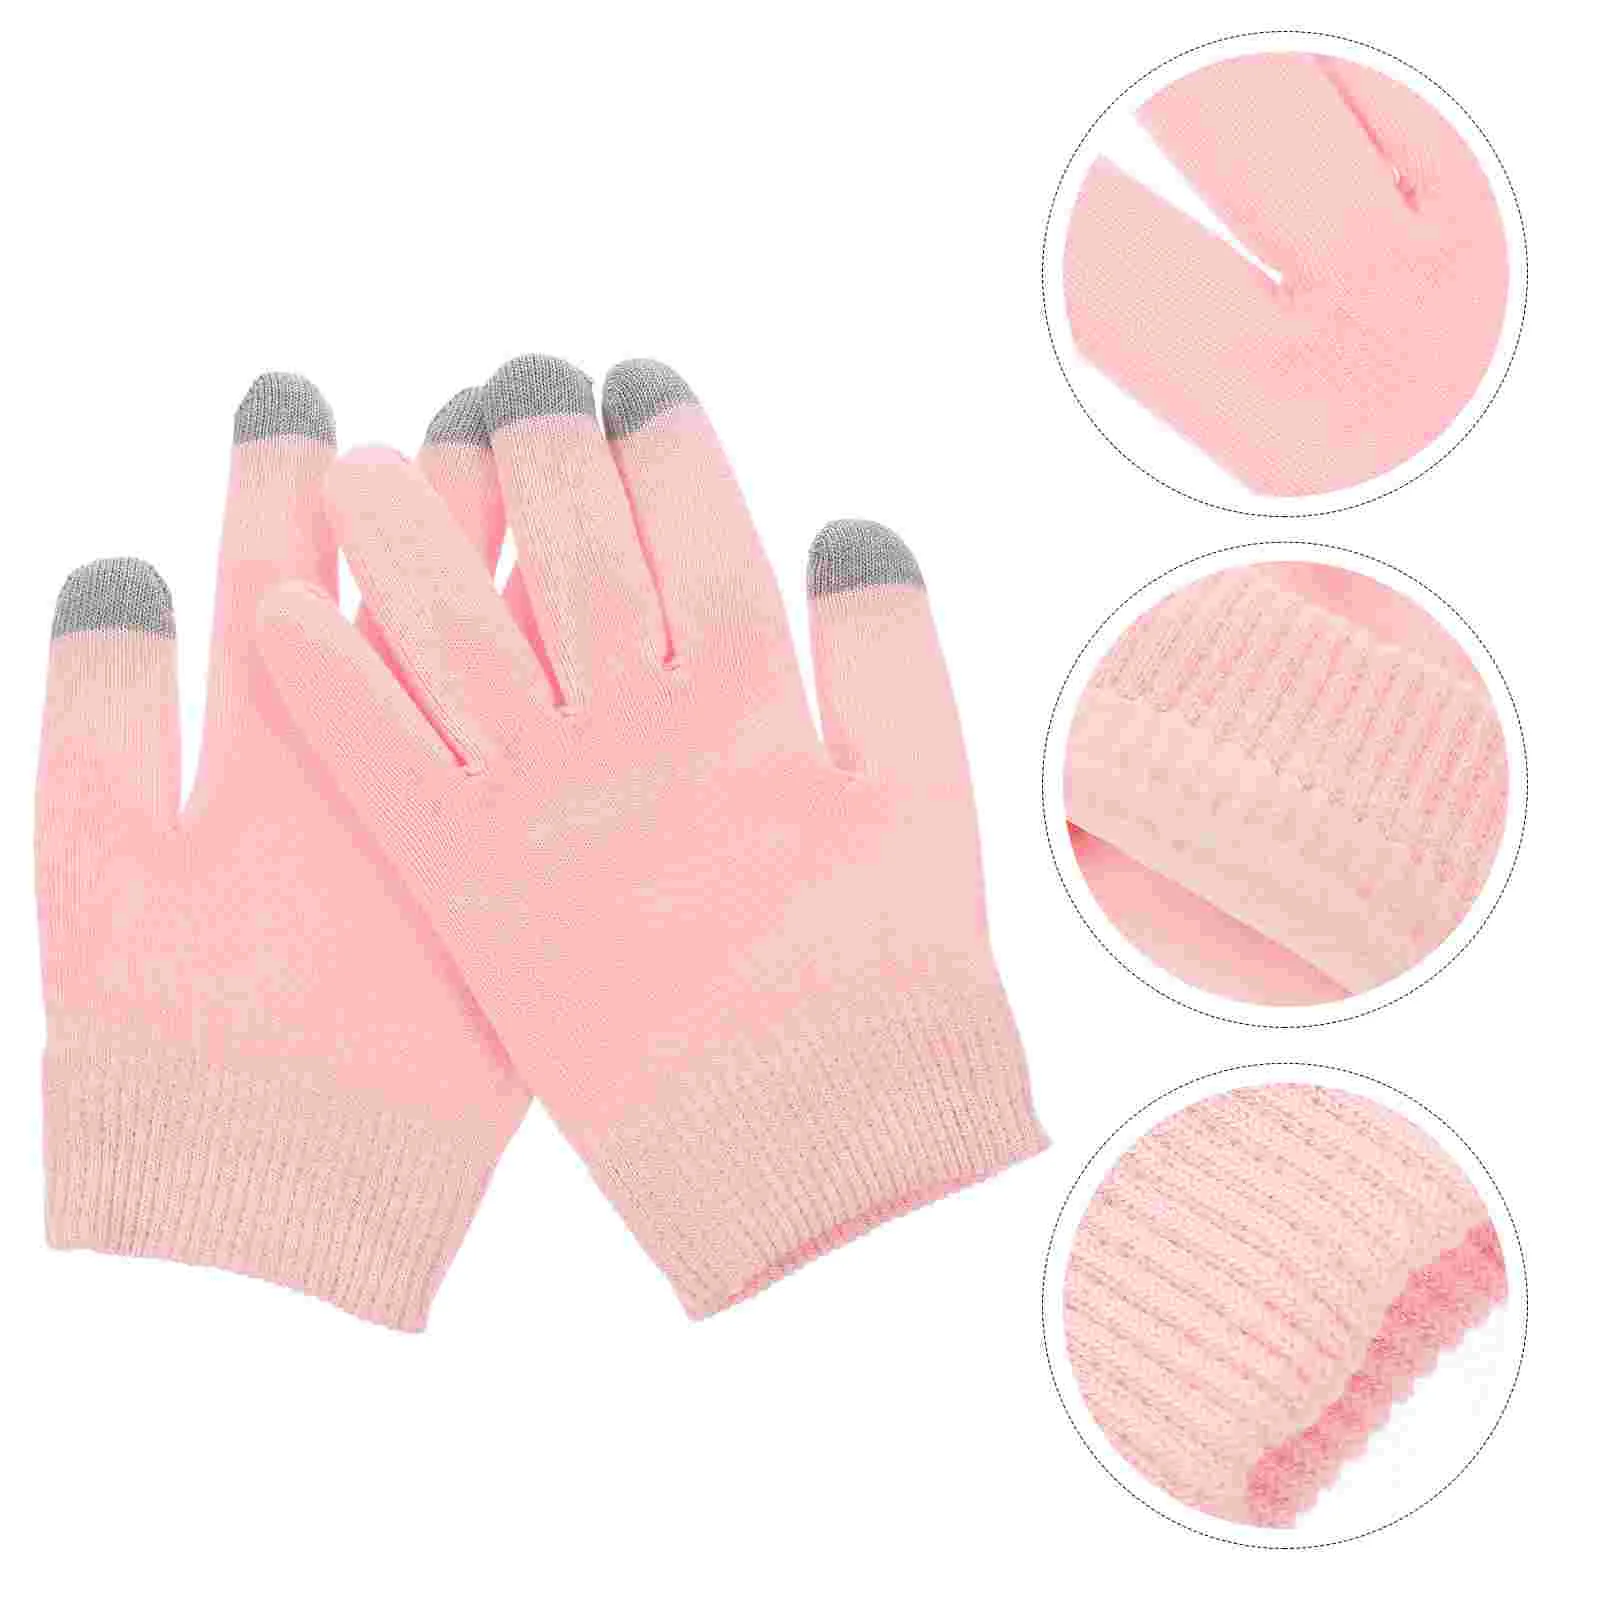 

Comfortable Gel Gloves Hand Moisturizing Overnight Spa Hands Touch Screen Lotion Dry Cracked Women